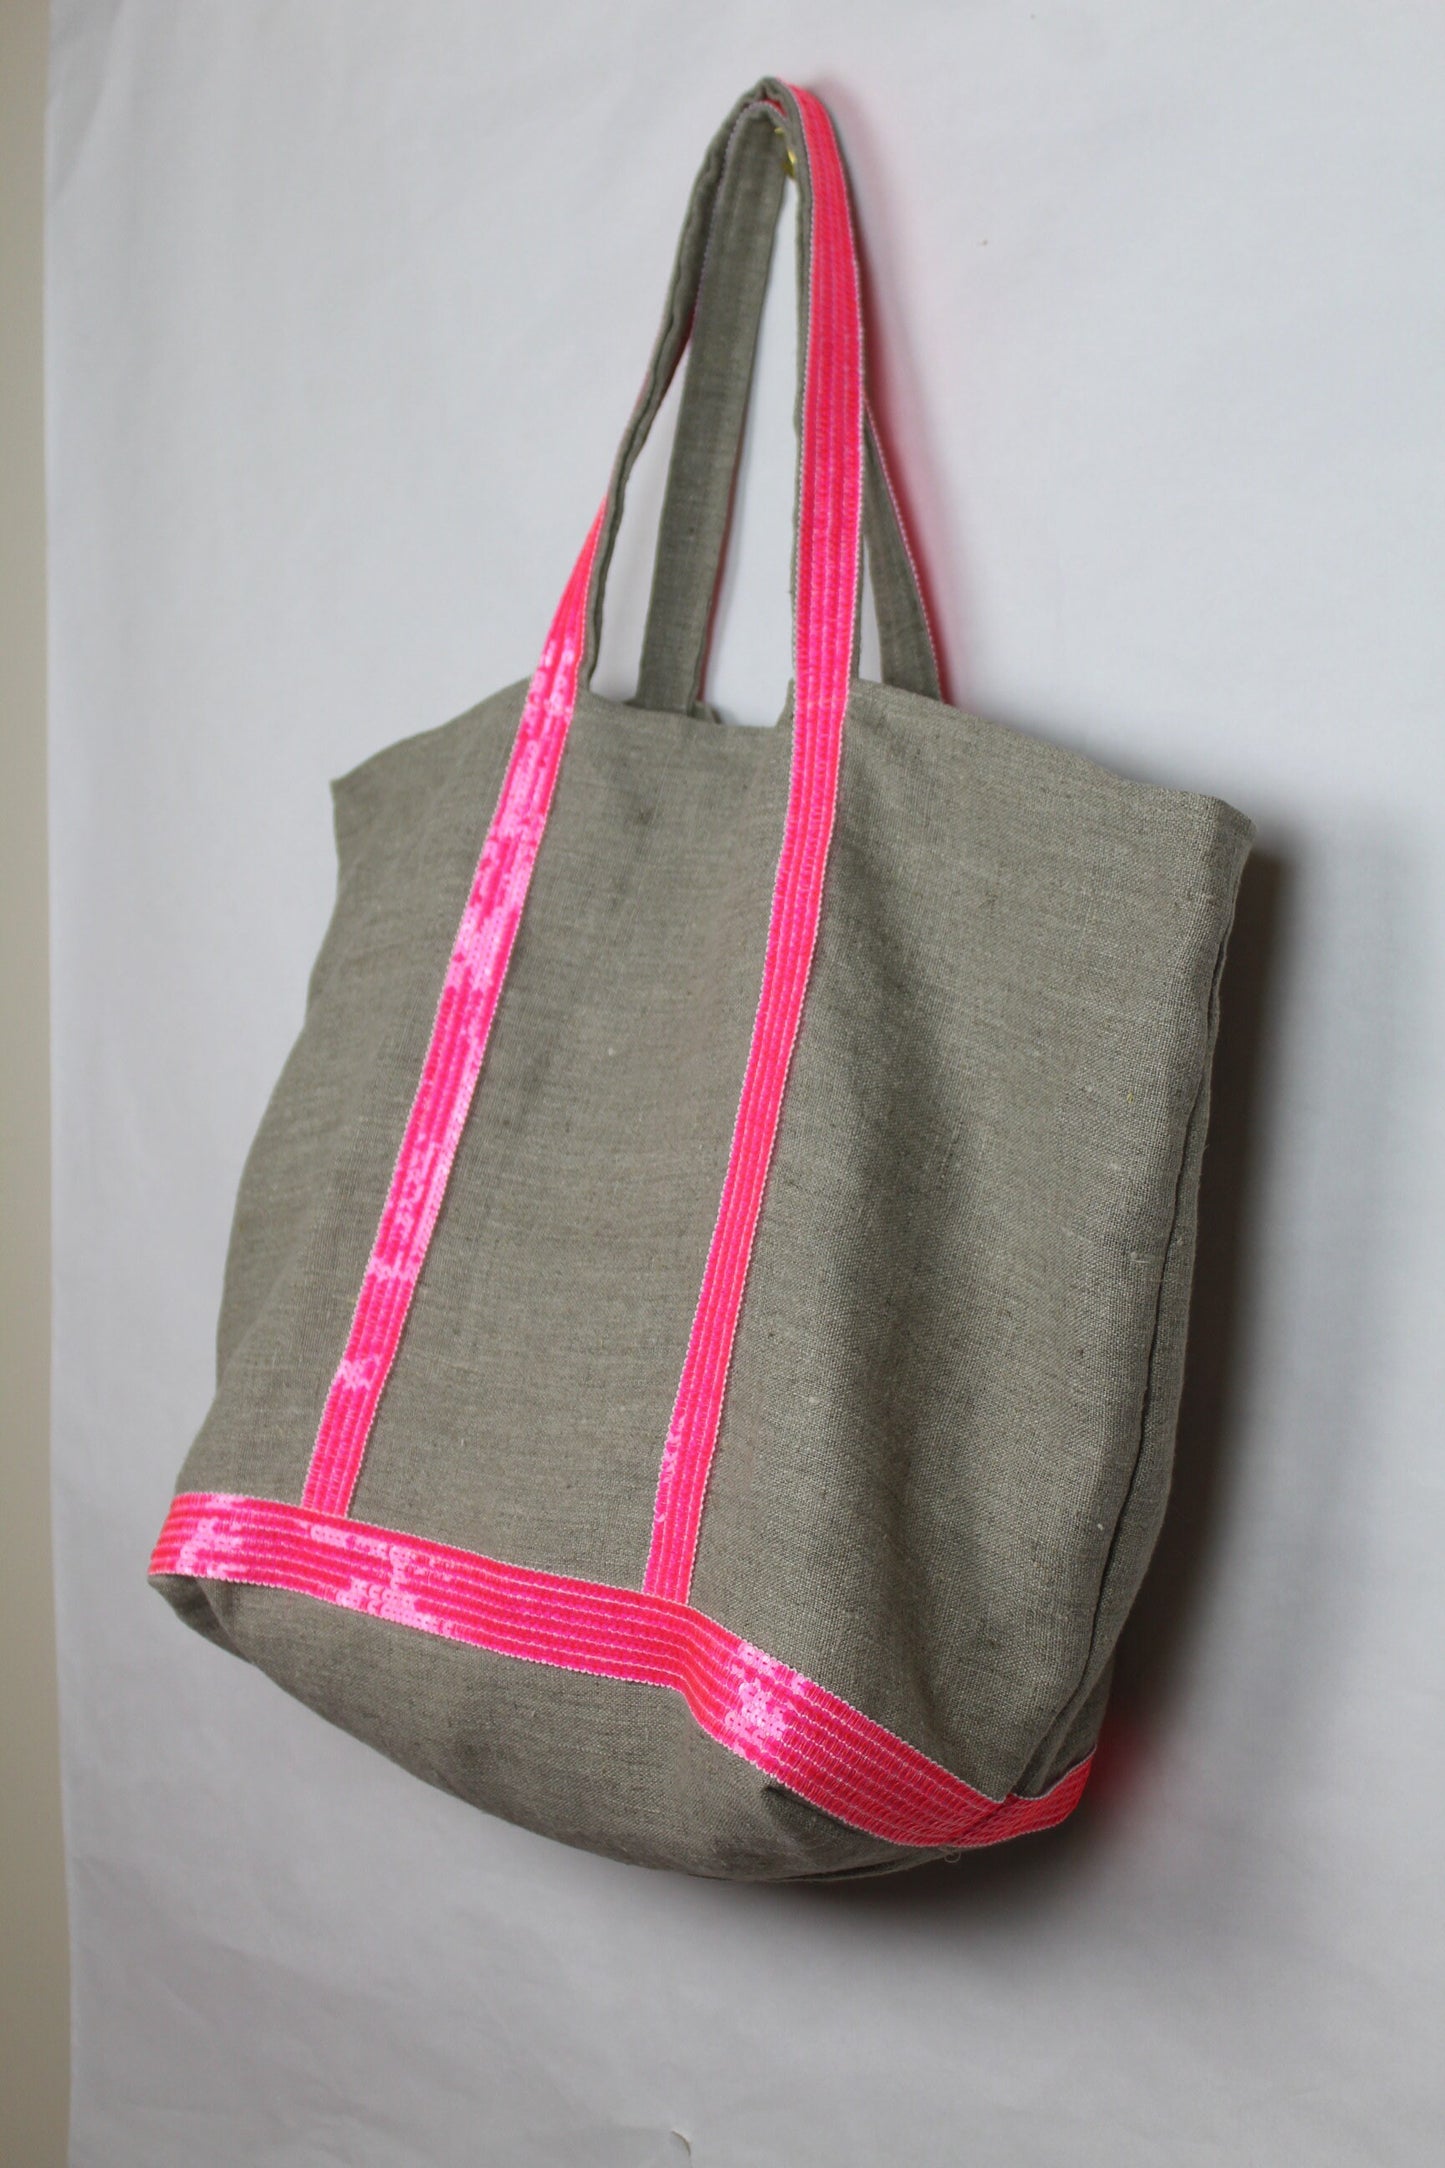 Natural washed linen tote bag, linen beach tote bag, neon pink sequin bag